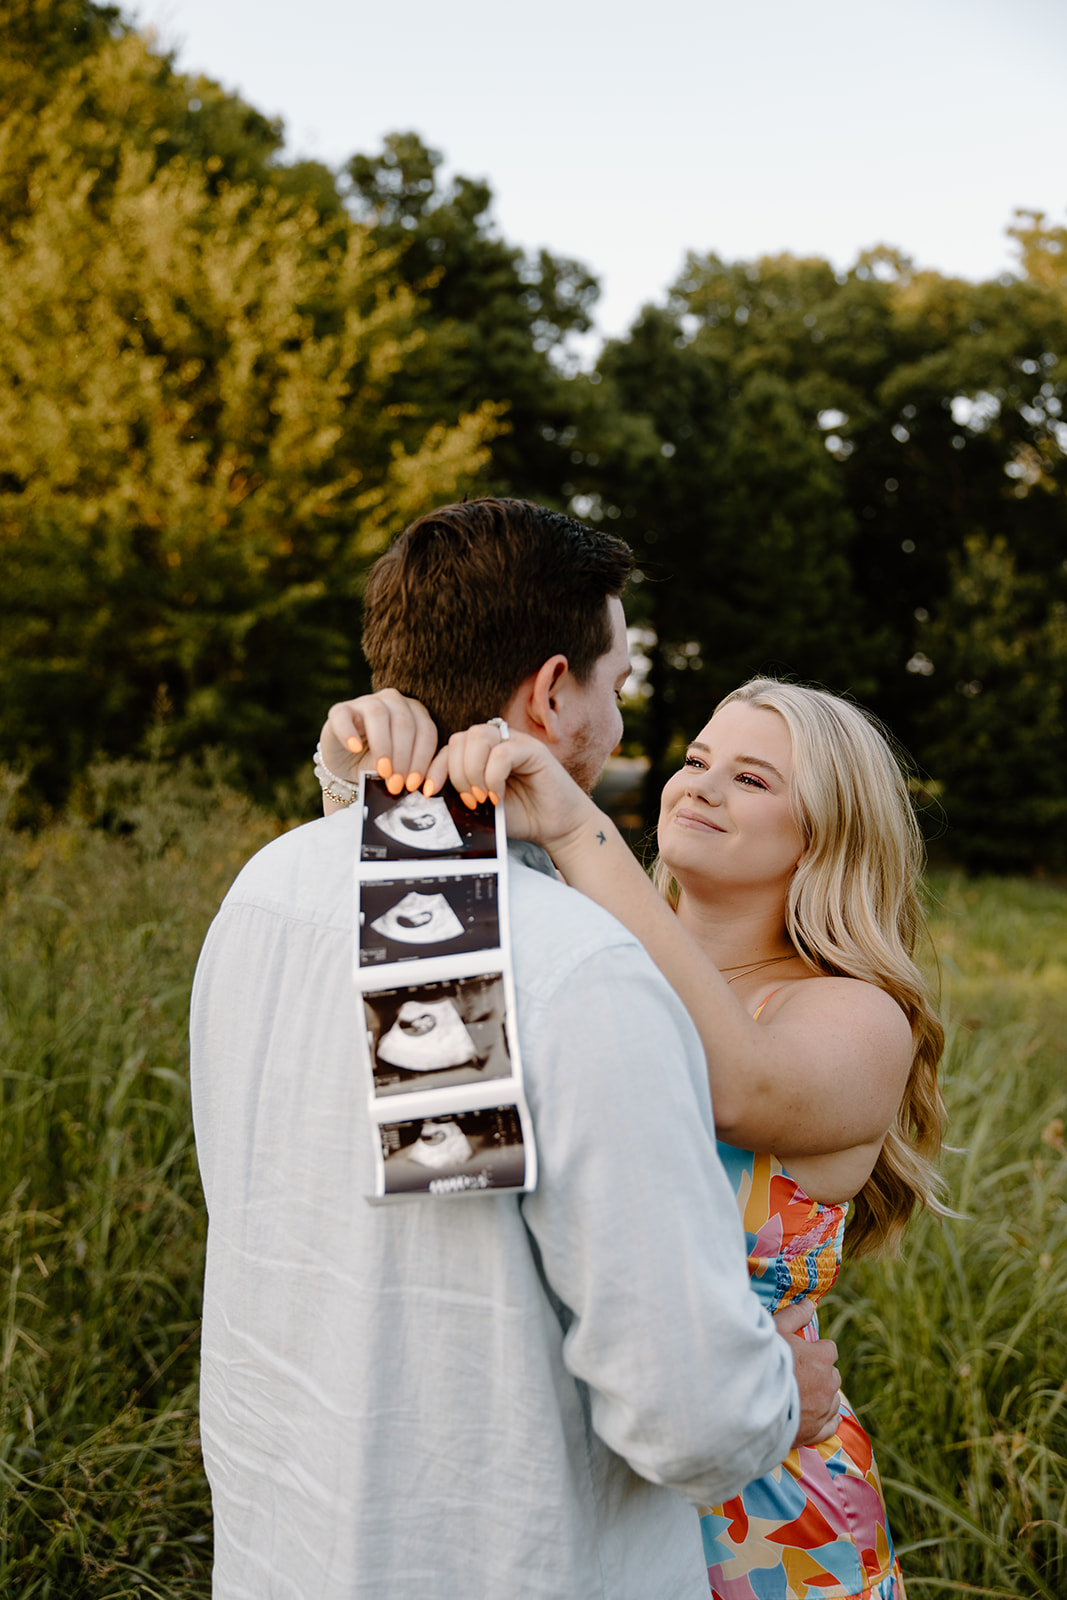 Pregnancy announcement photoshoot locations in Raleigh, North Carolina